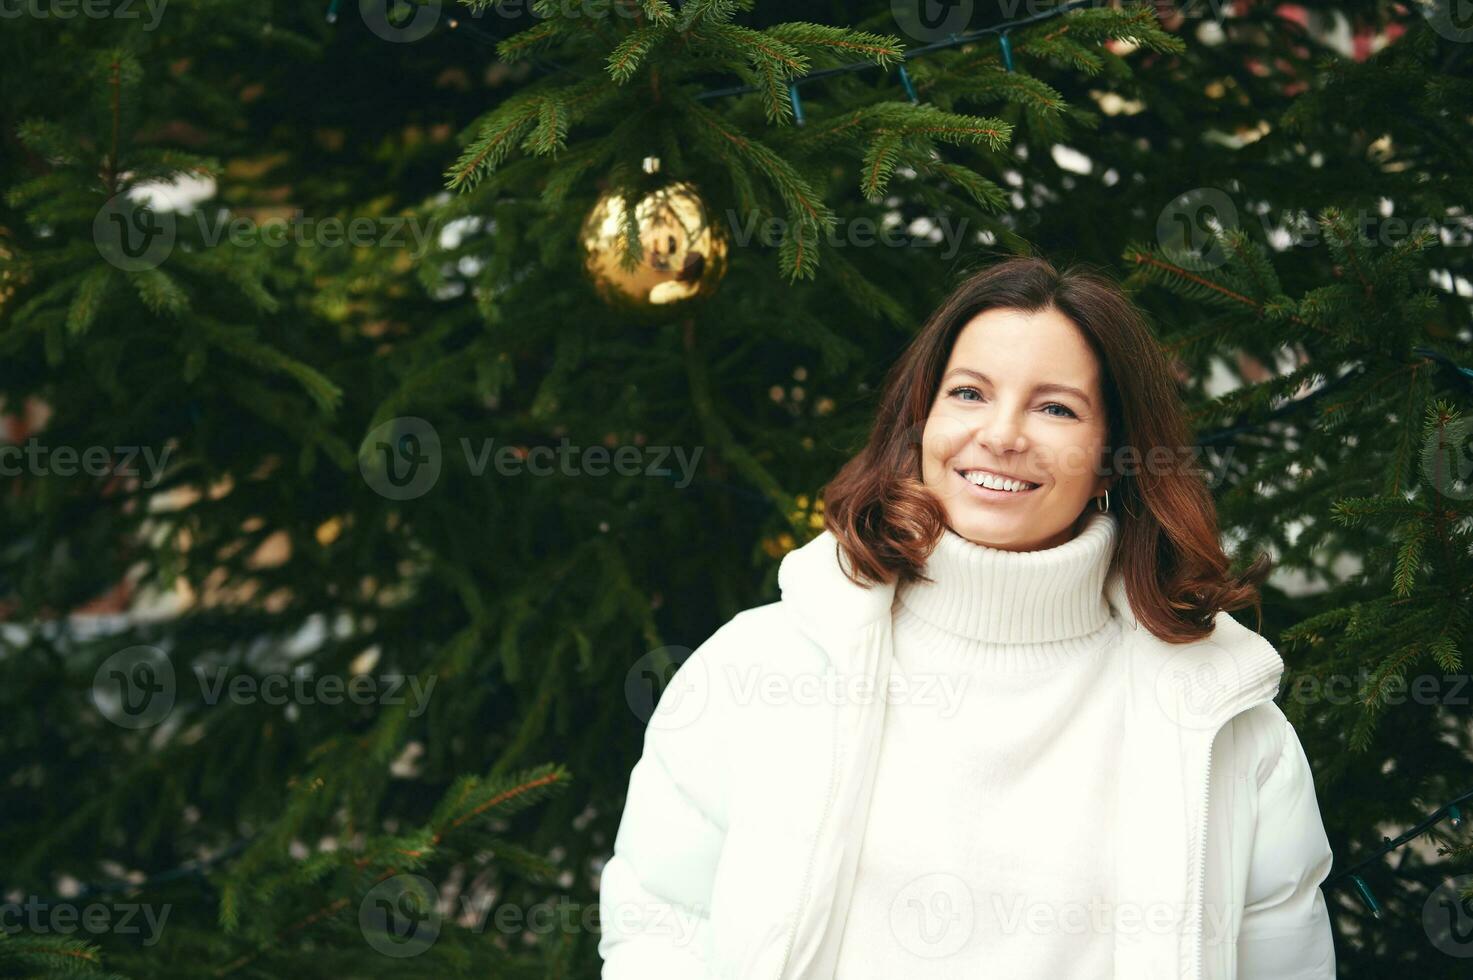 Outdoor portrait of happy woman next to green Christmas tree, wearing white pullover and jacket photo